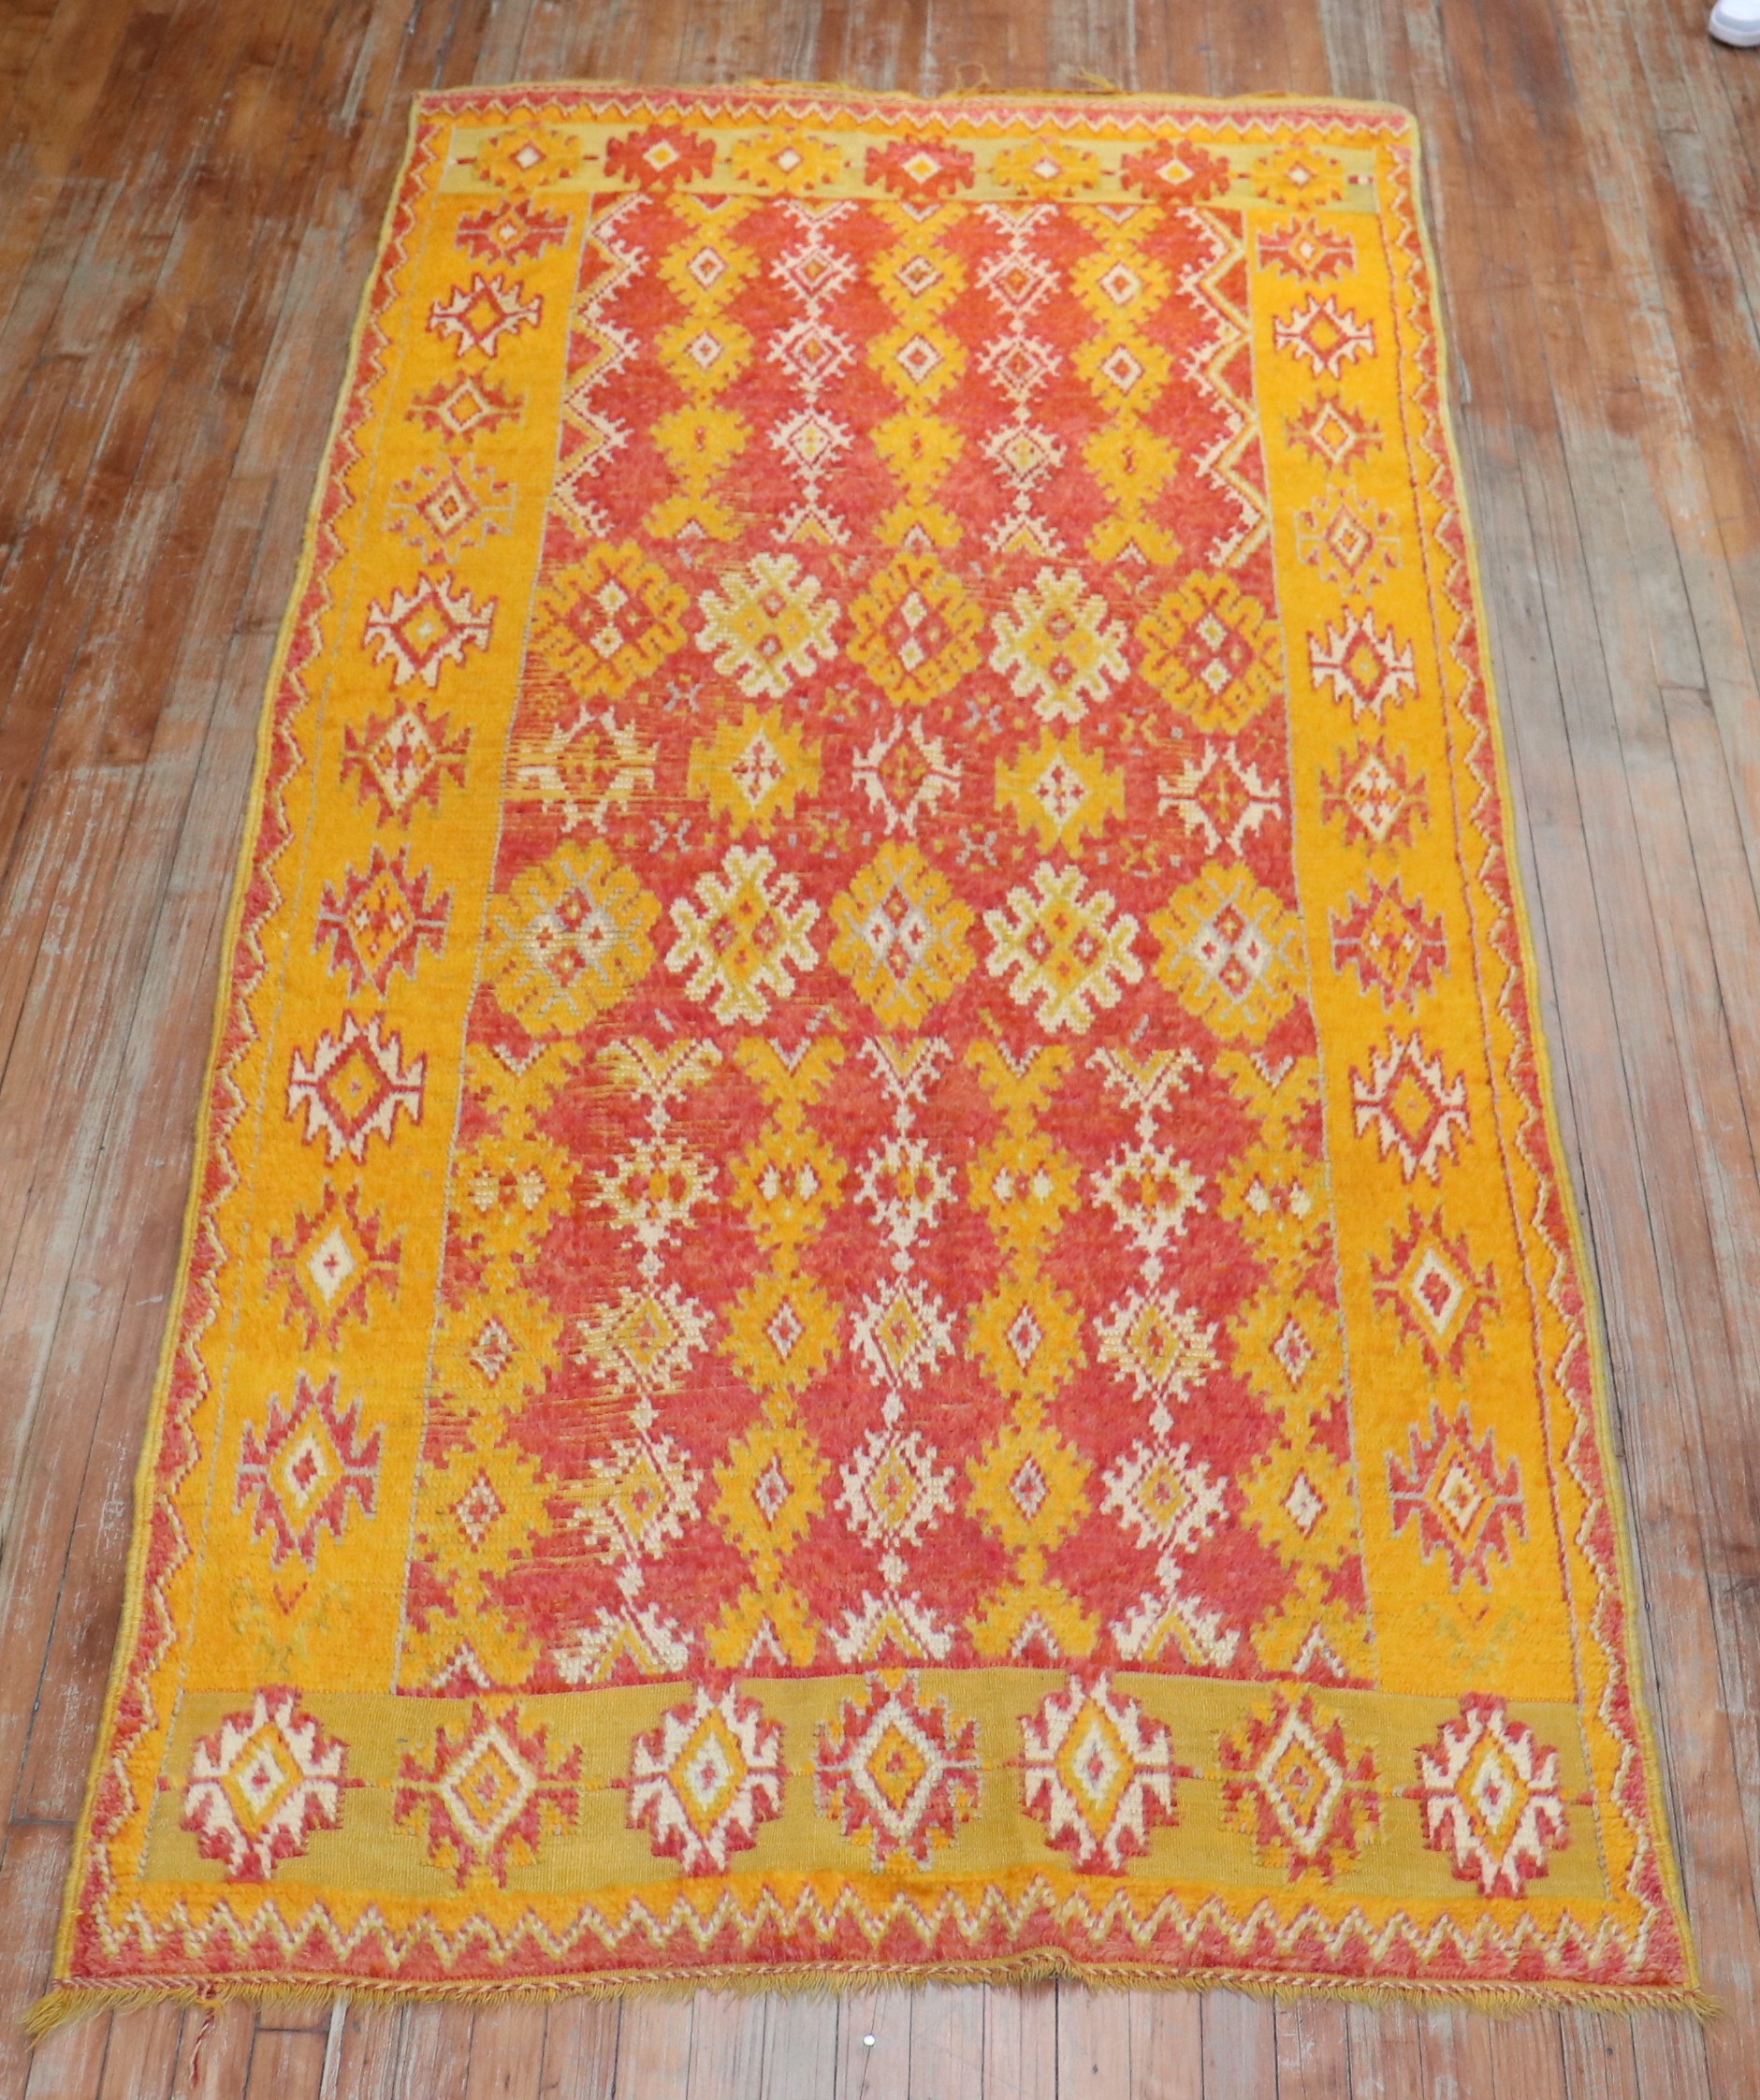 Fakultet frivillig Australien Bright Red Yellow Moroccan Rug No. 10428 - J&D Oriental Rugs Co. - Antique  Decorative Oriental Rugs